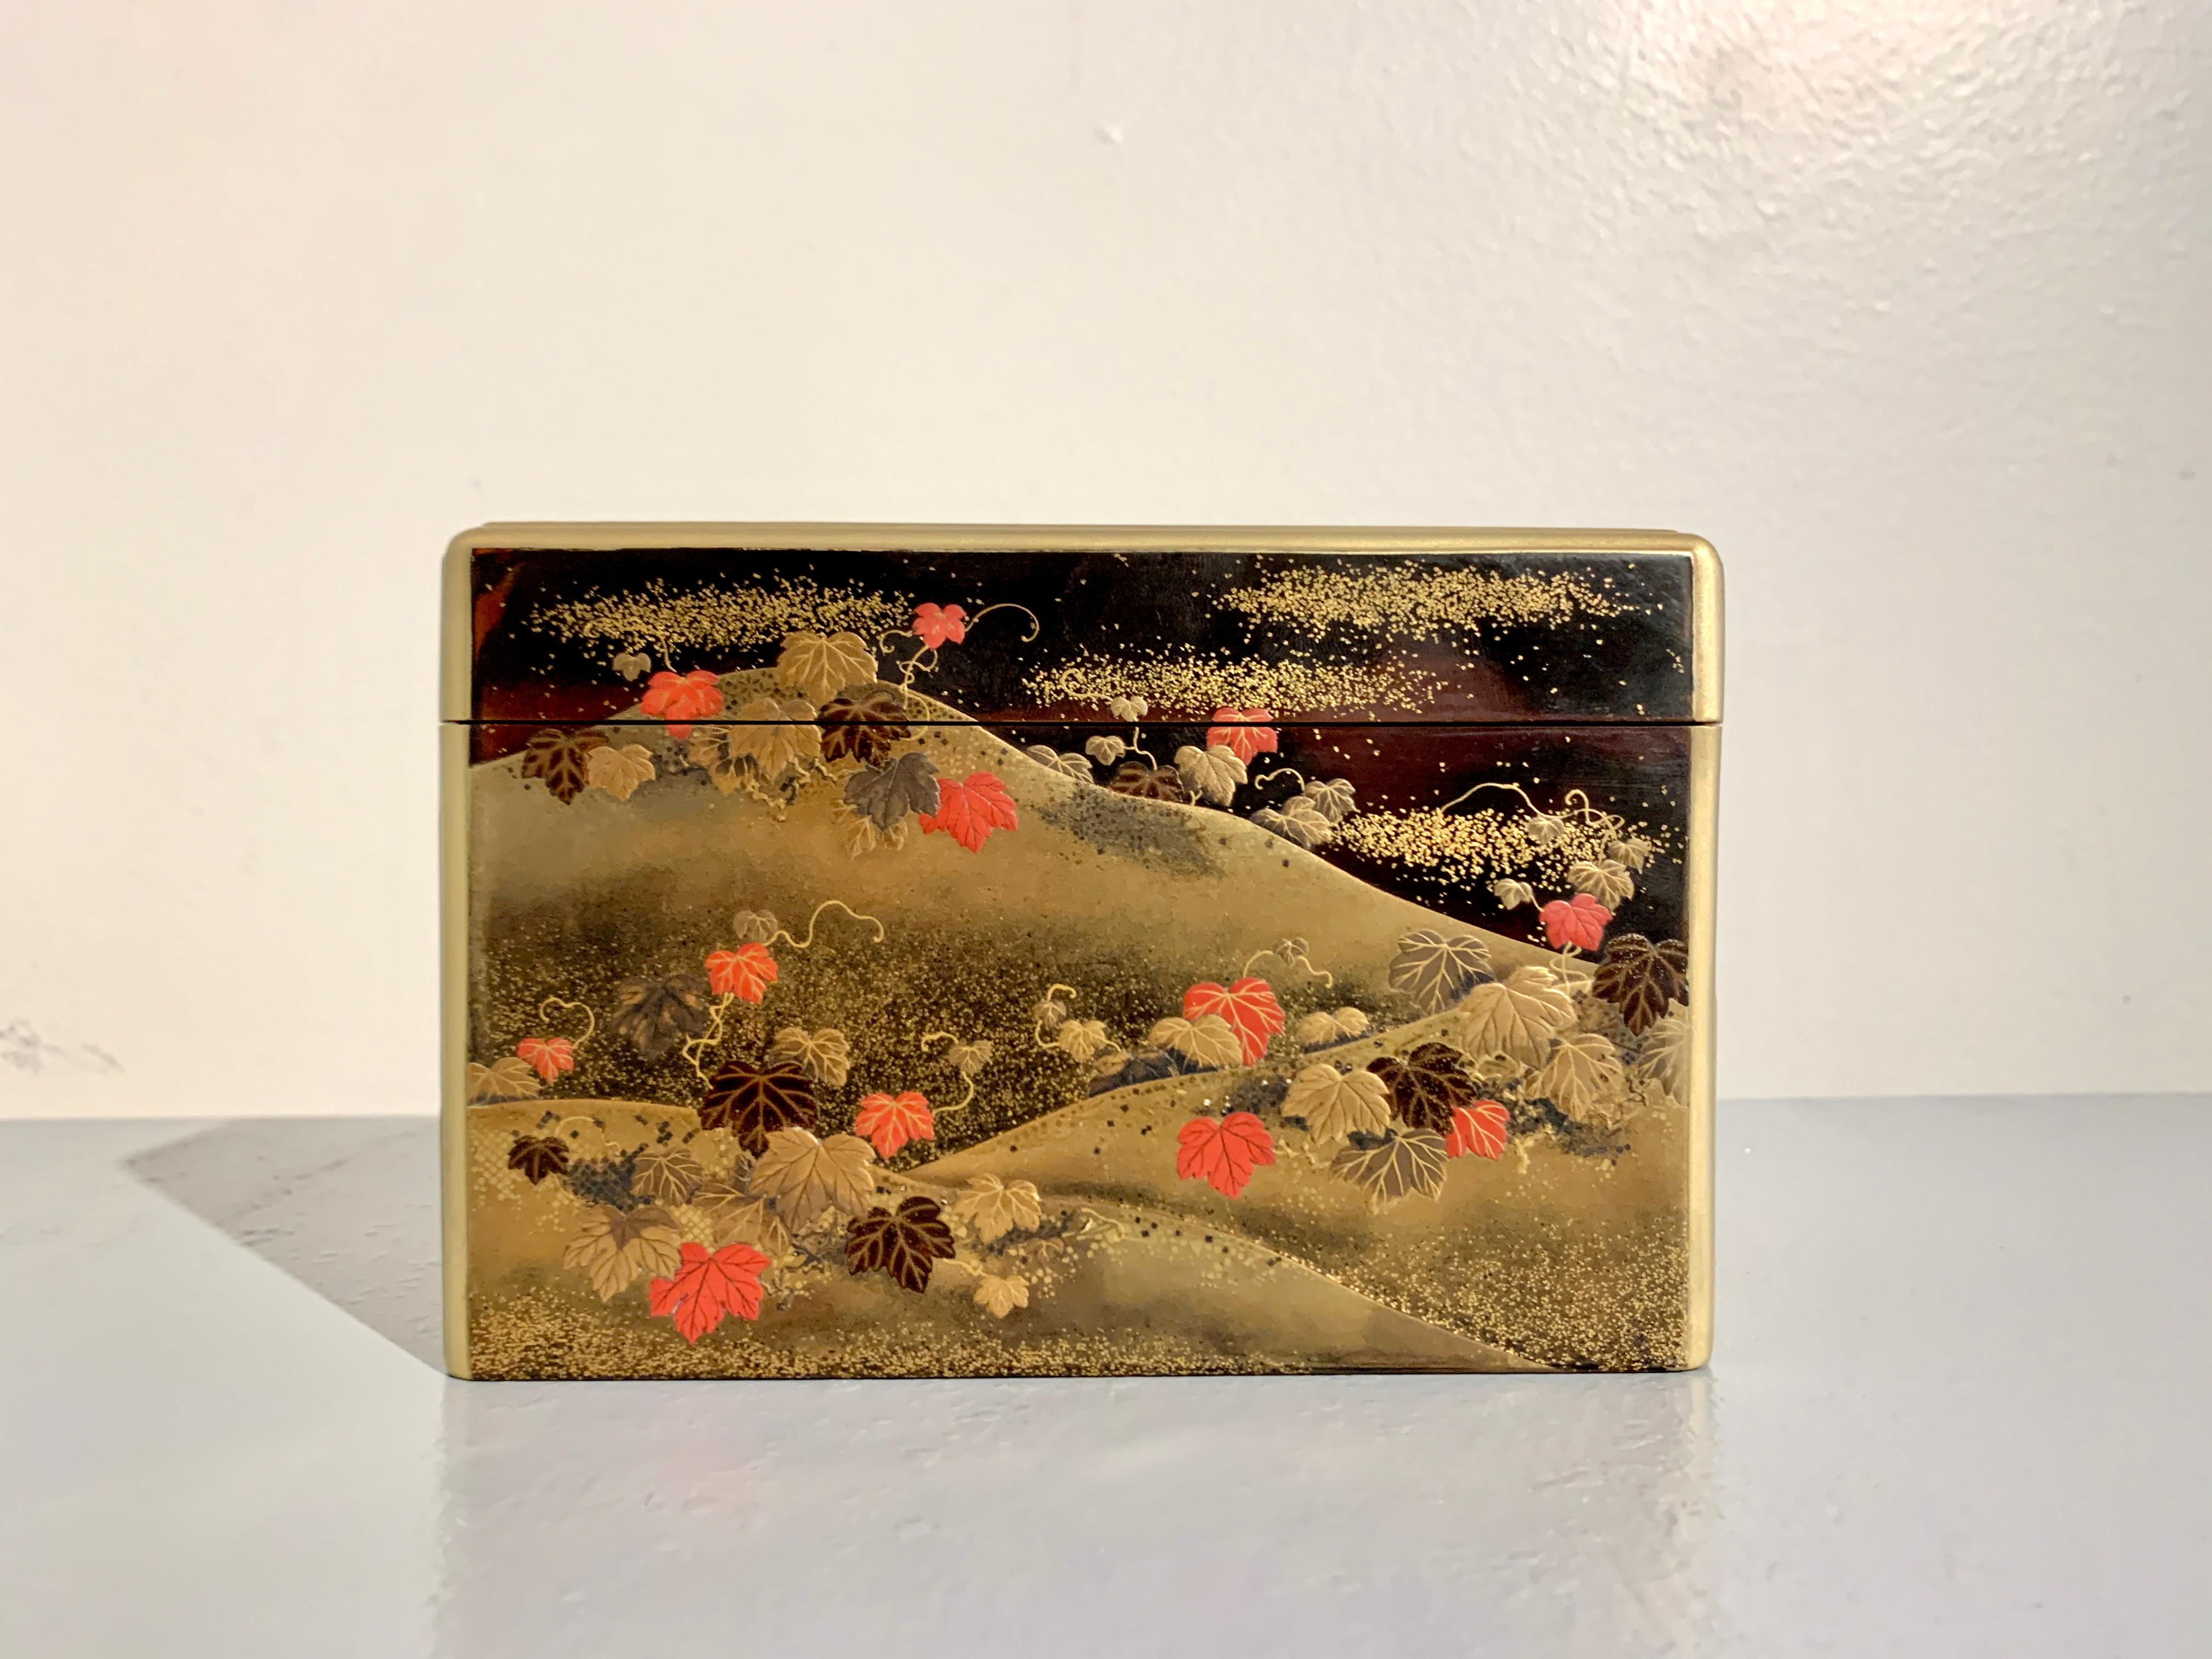 An exquisite Japanese tall lacquer box for incense implements, kobako, with a scene from The Tales of Ise, chapter 9, 